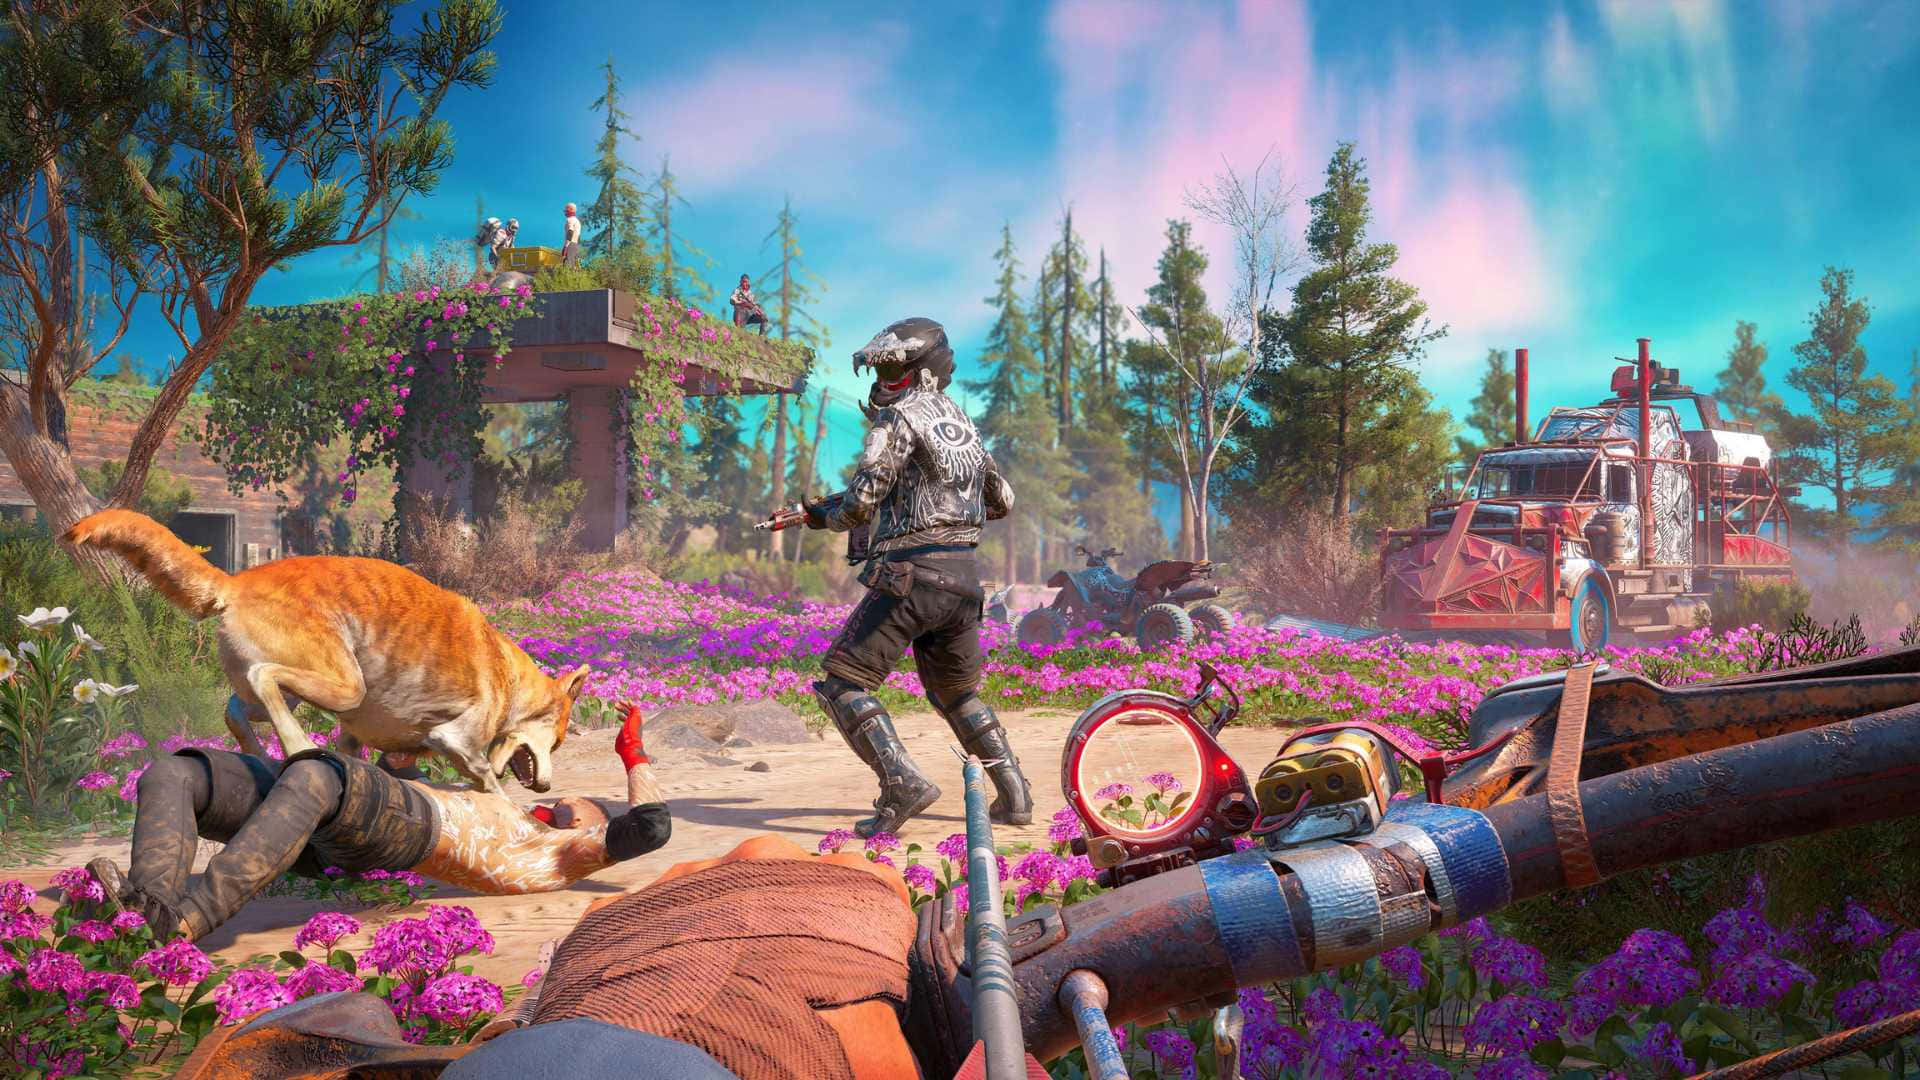 Far Cry New Dawn: New trailer and screens - Gamersyde